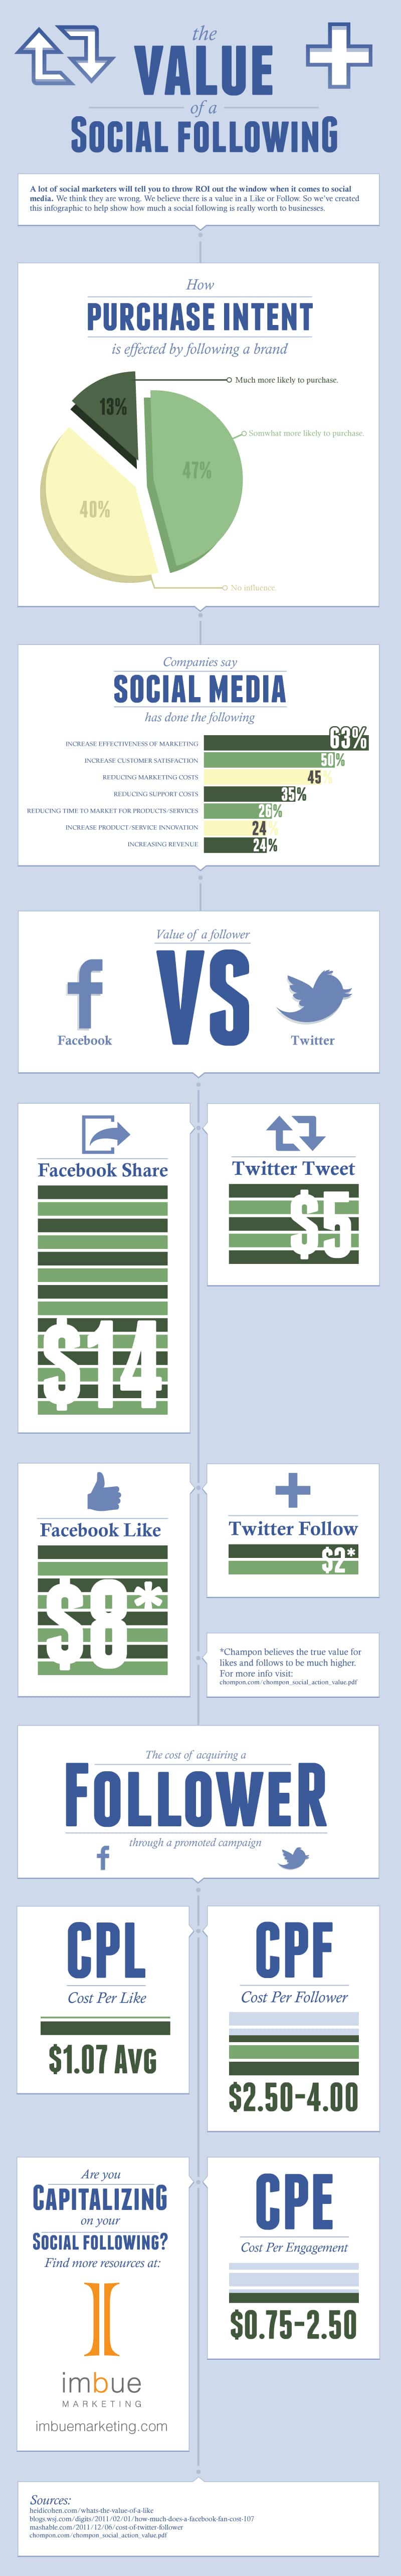 value-of-social-following-infographic